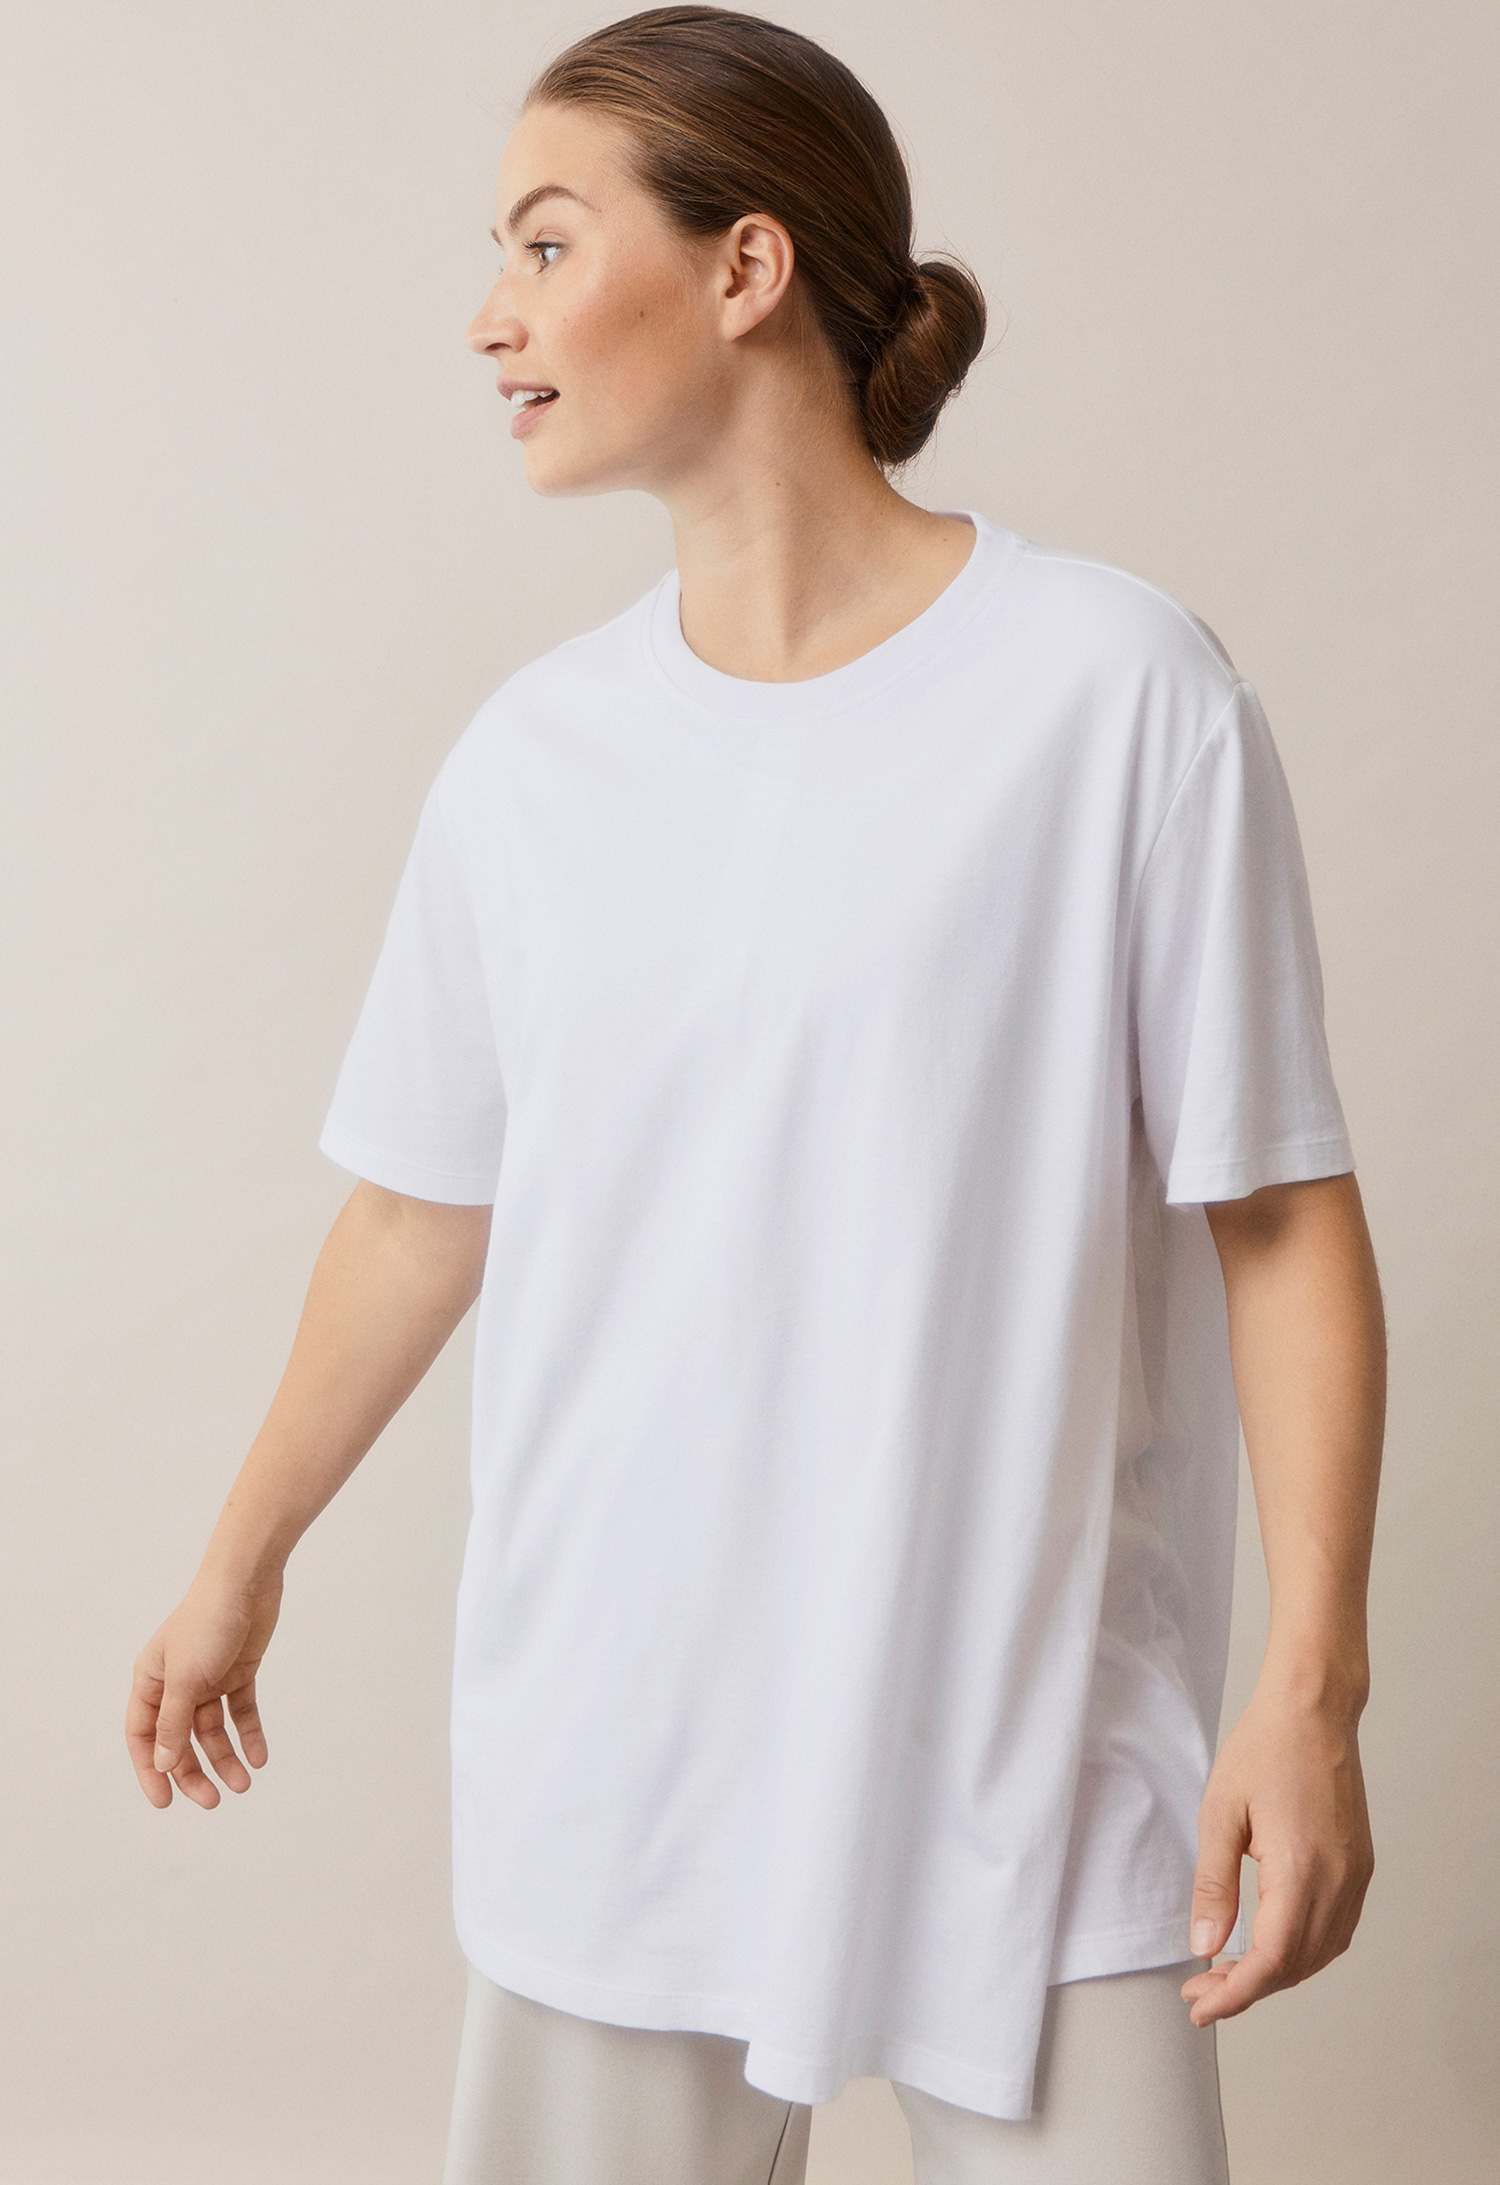 Oversized t-shirt with nursing access - White